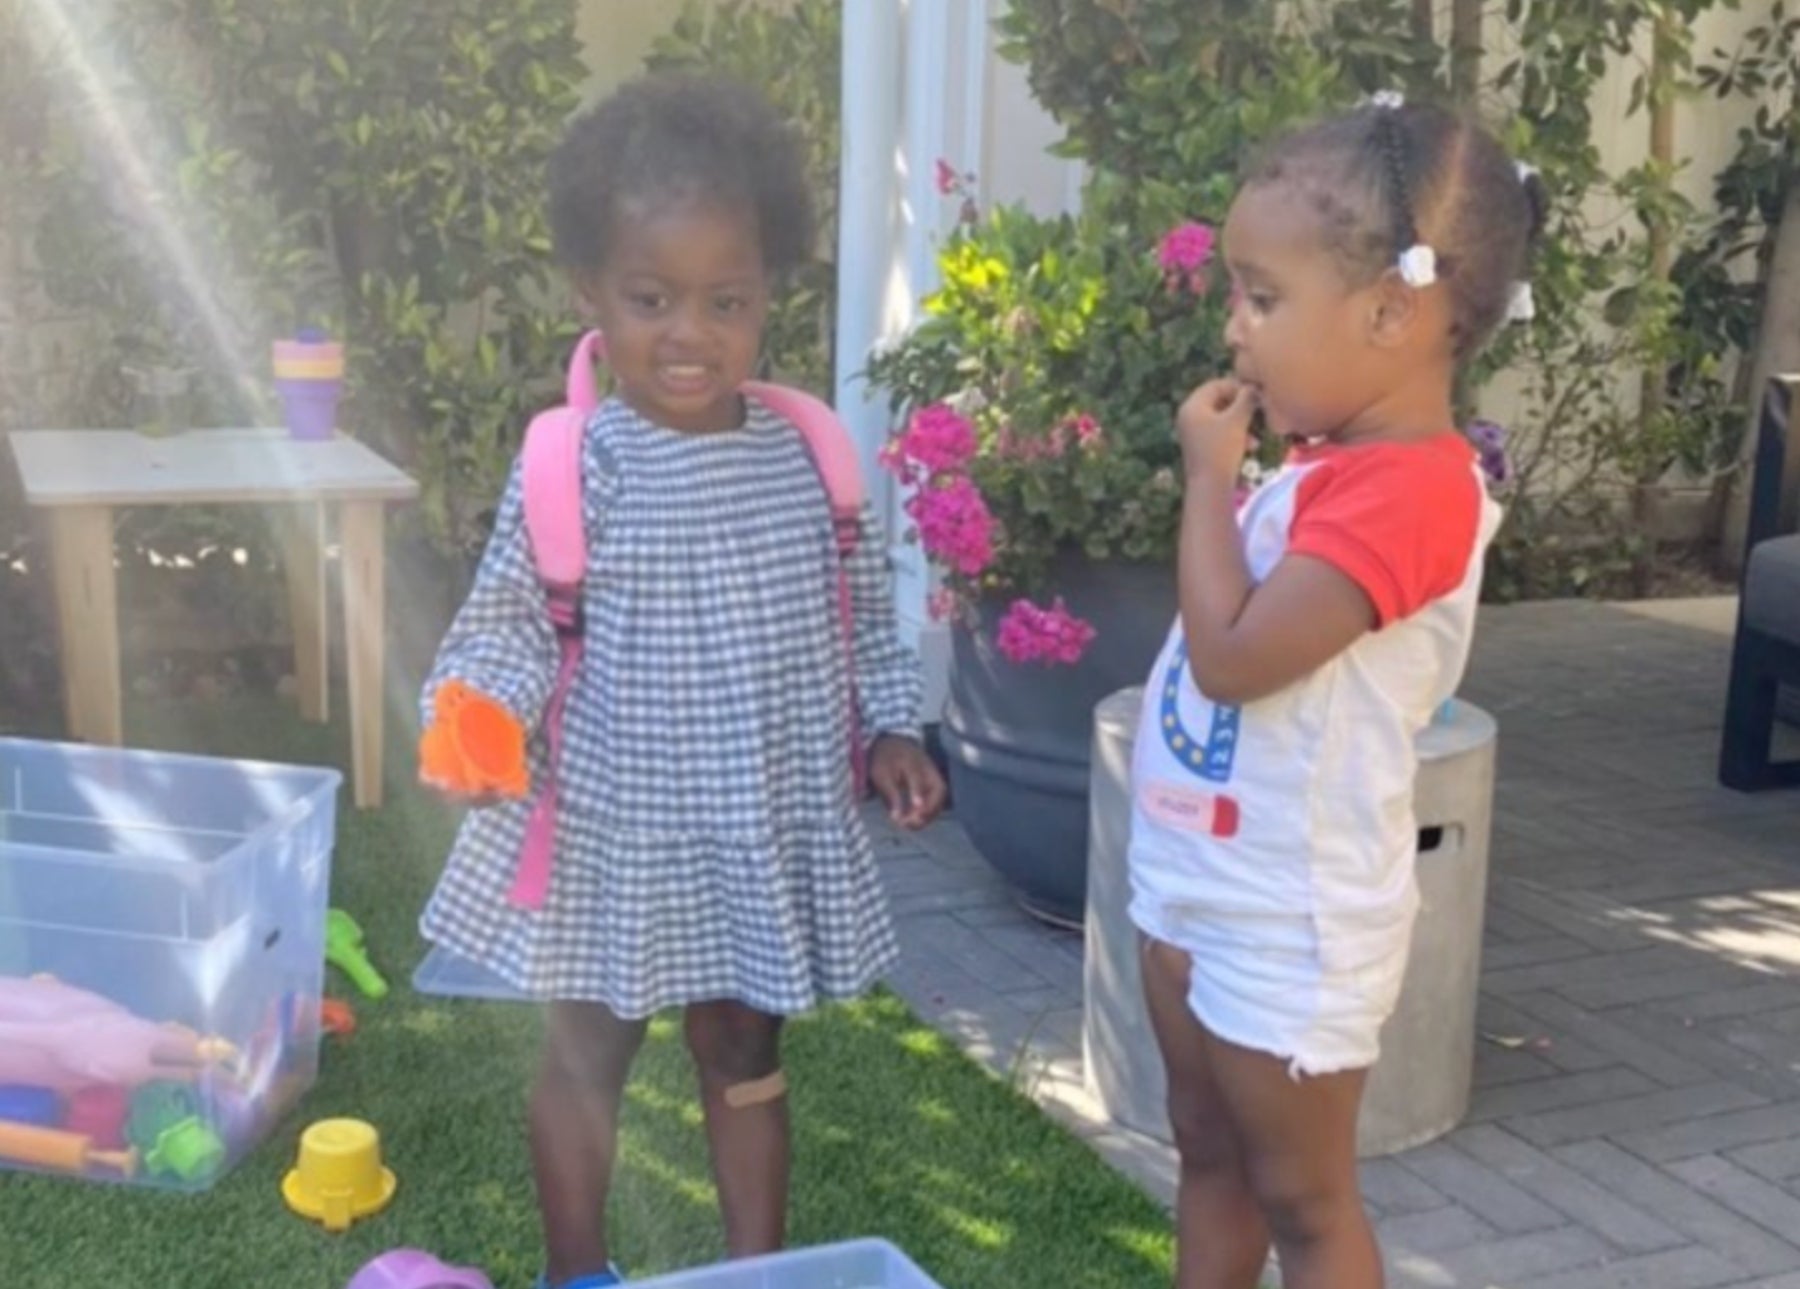 The Girls Are Playing: Celeb Kids Kaavia And Cairo Had Another Cute Playdate